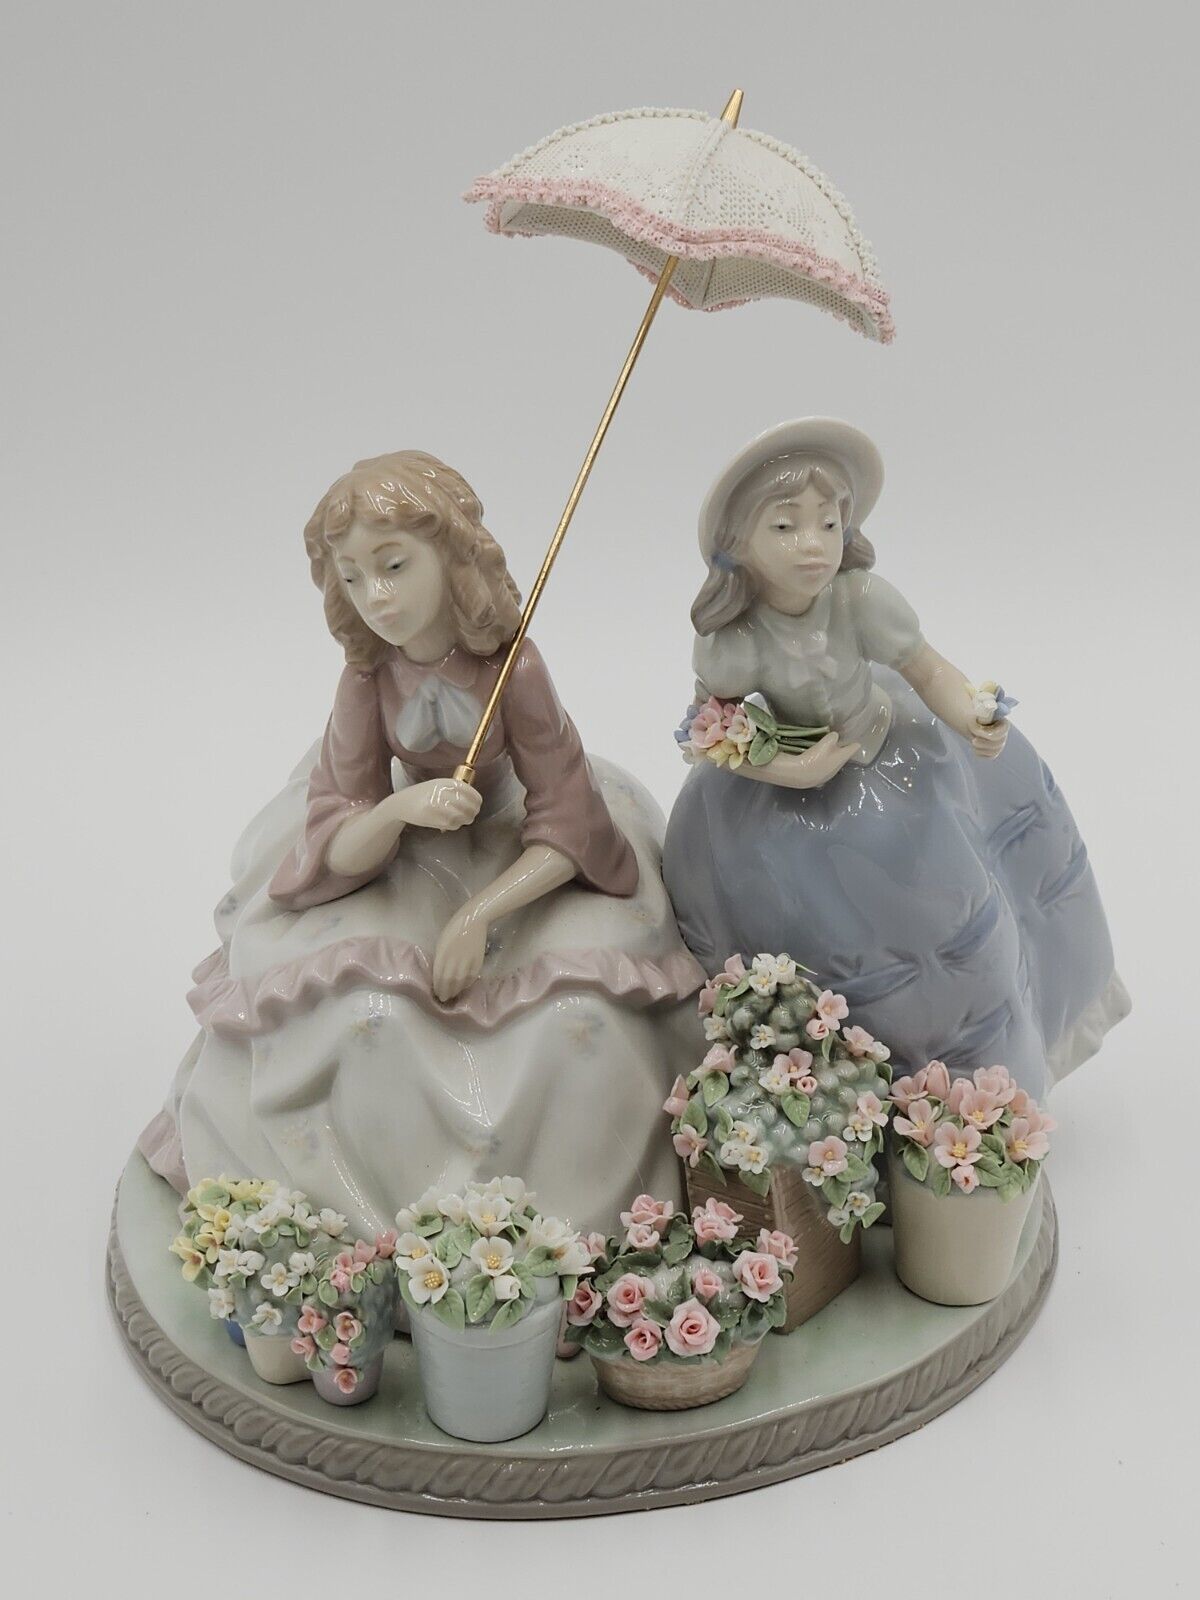 Rare Lladro 5537 'Flowers For Sale' With Box 1989 Retired Designed  Jose Puche 